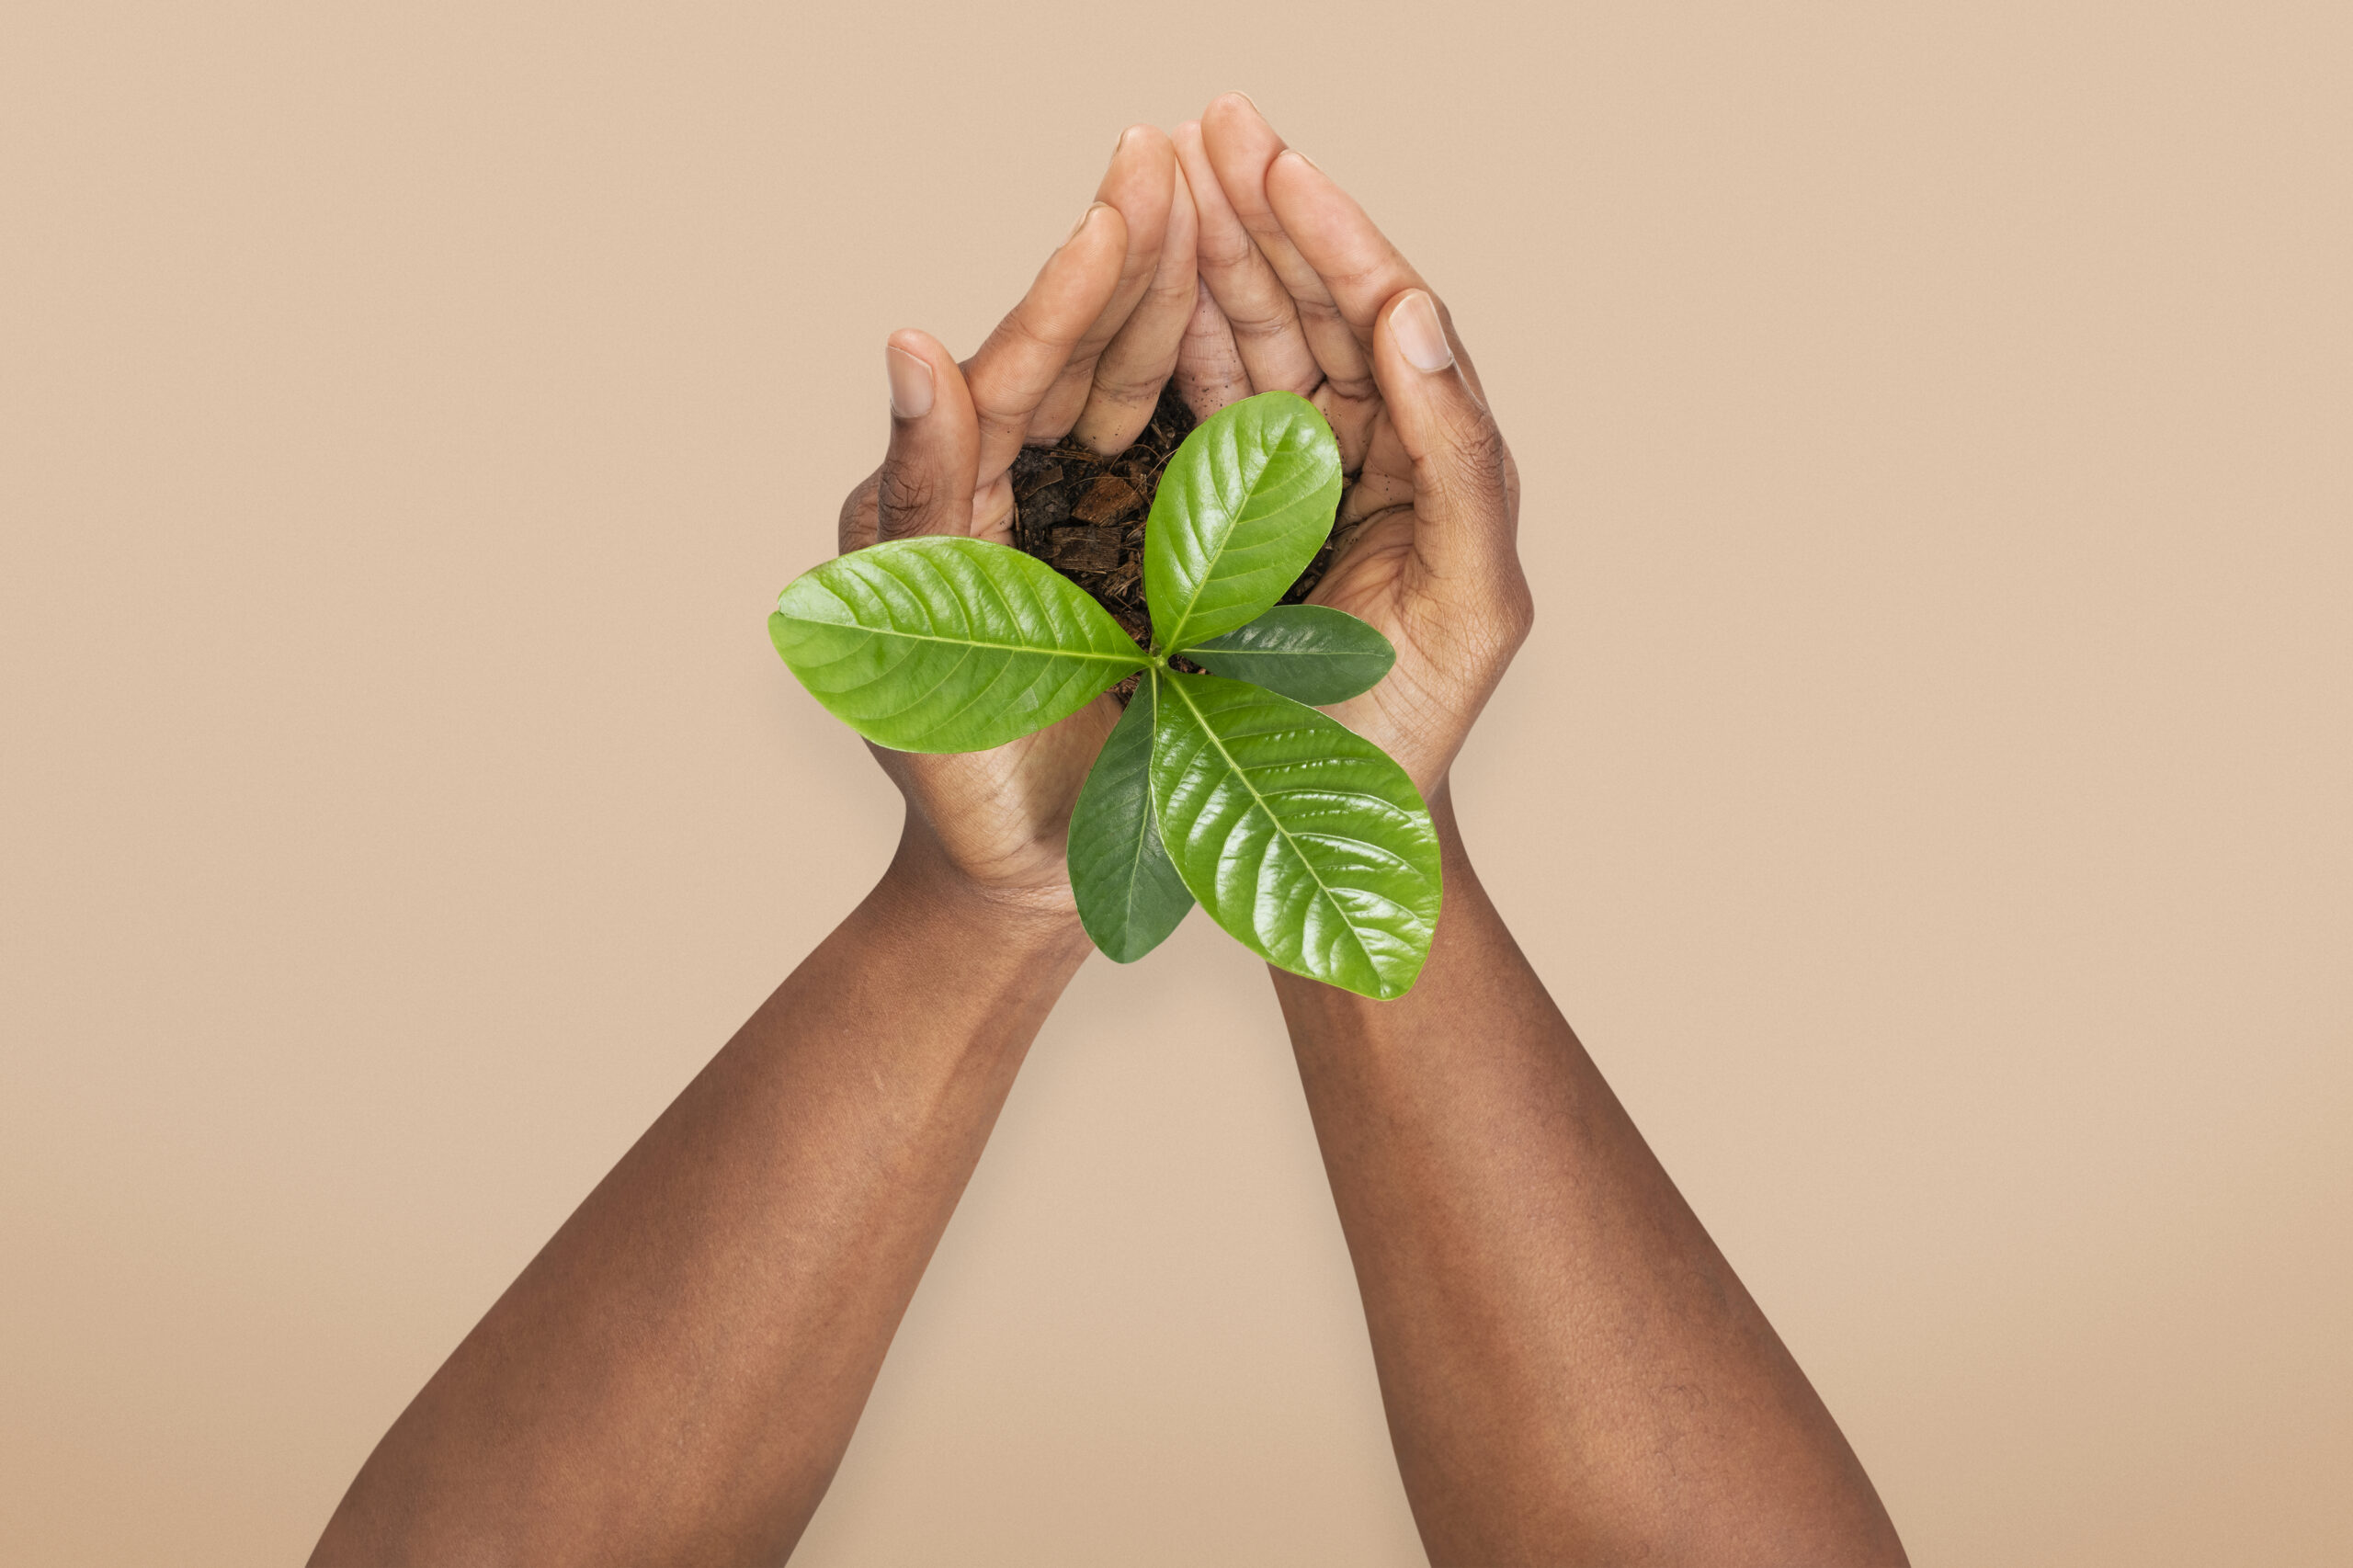 Freepik: Hands cupping plant save the environment campaign.